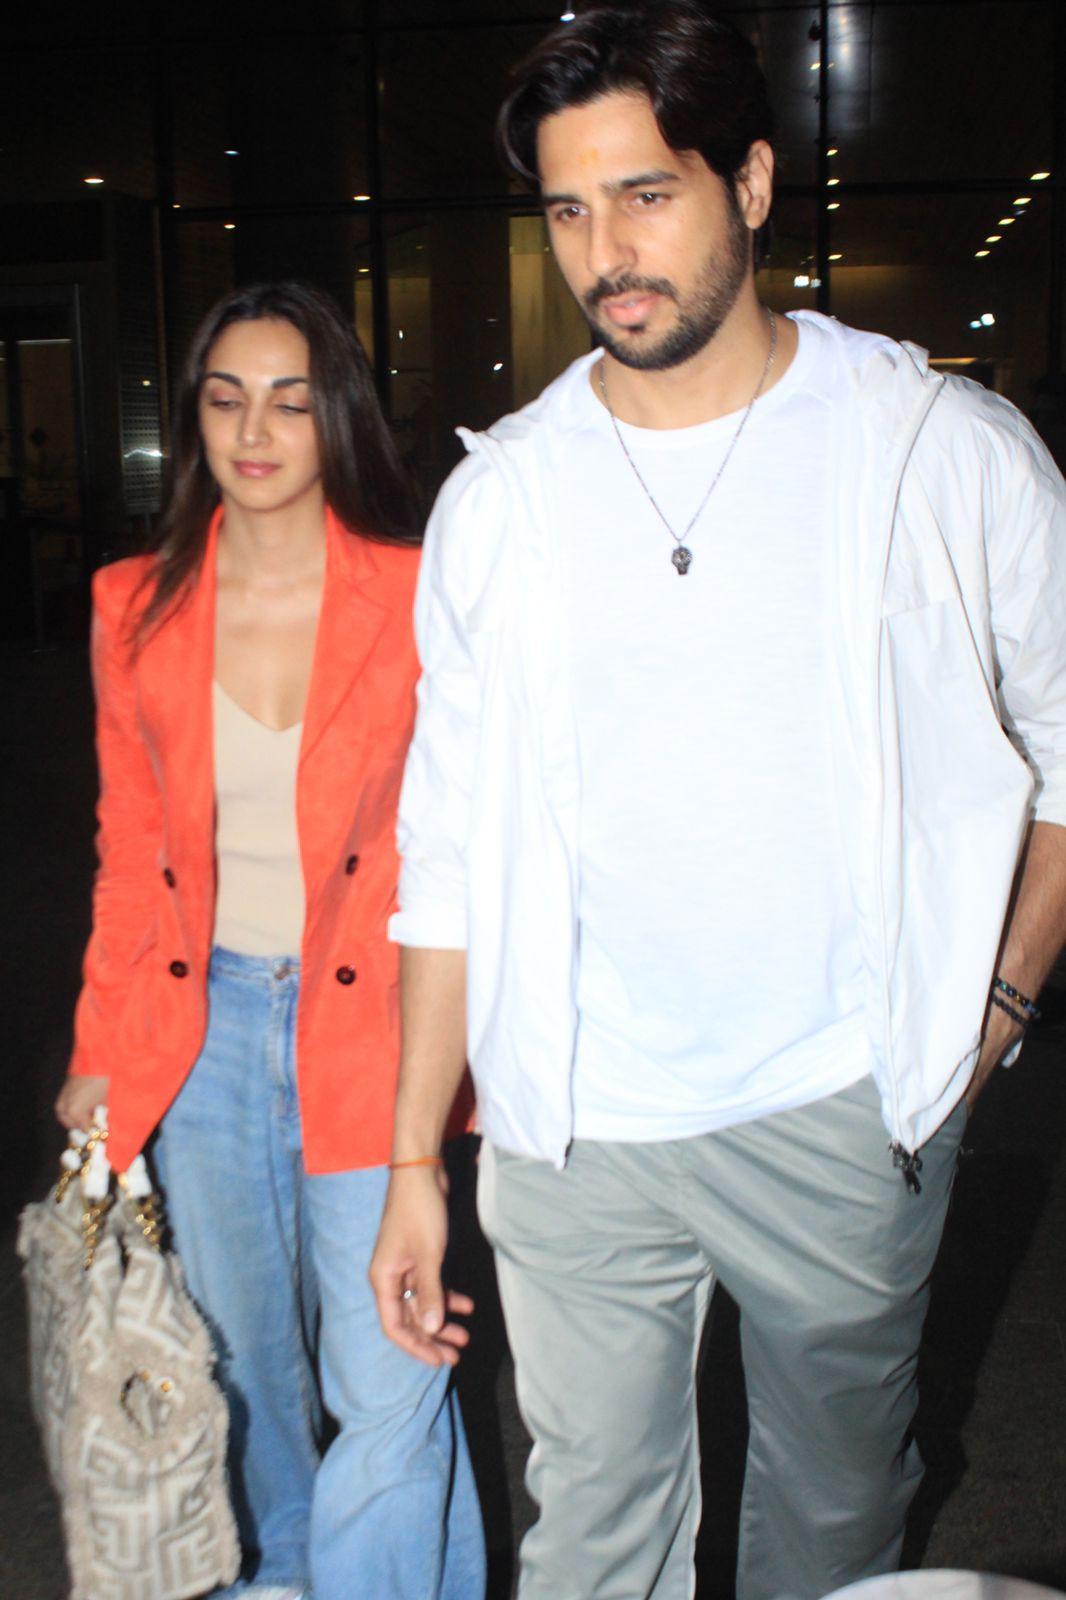 Sidharth Malhotra and Kiara Advani were seen walking hand-in-hand as they were snapped at the airport